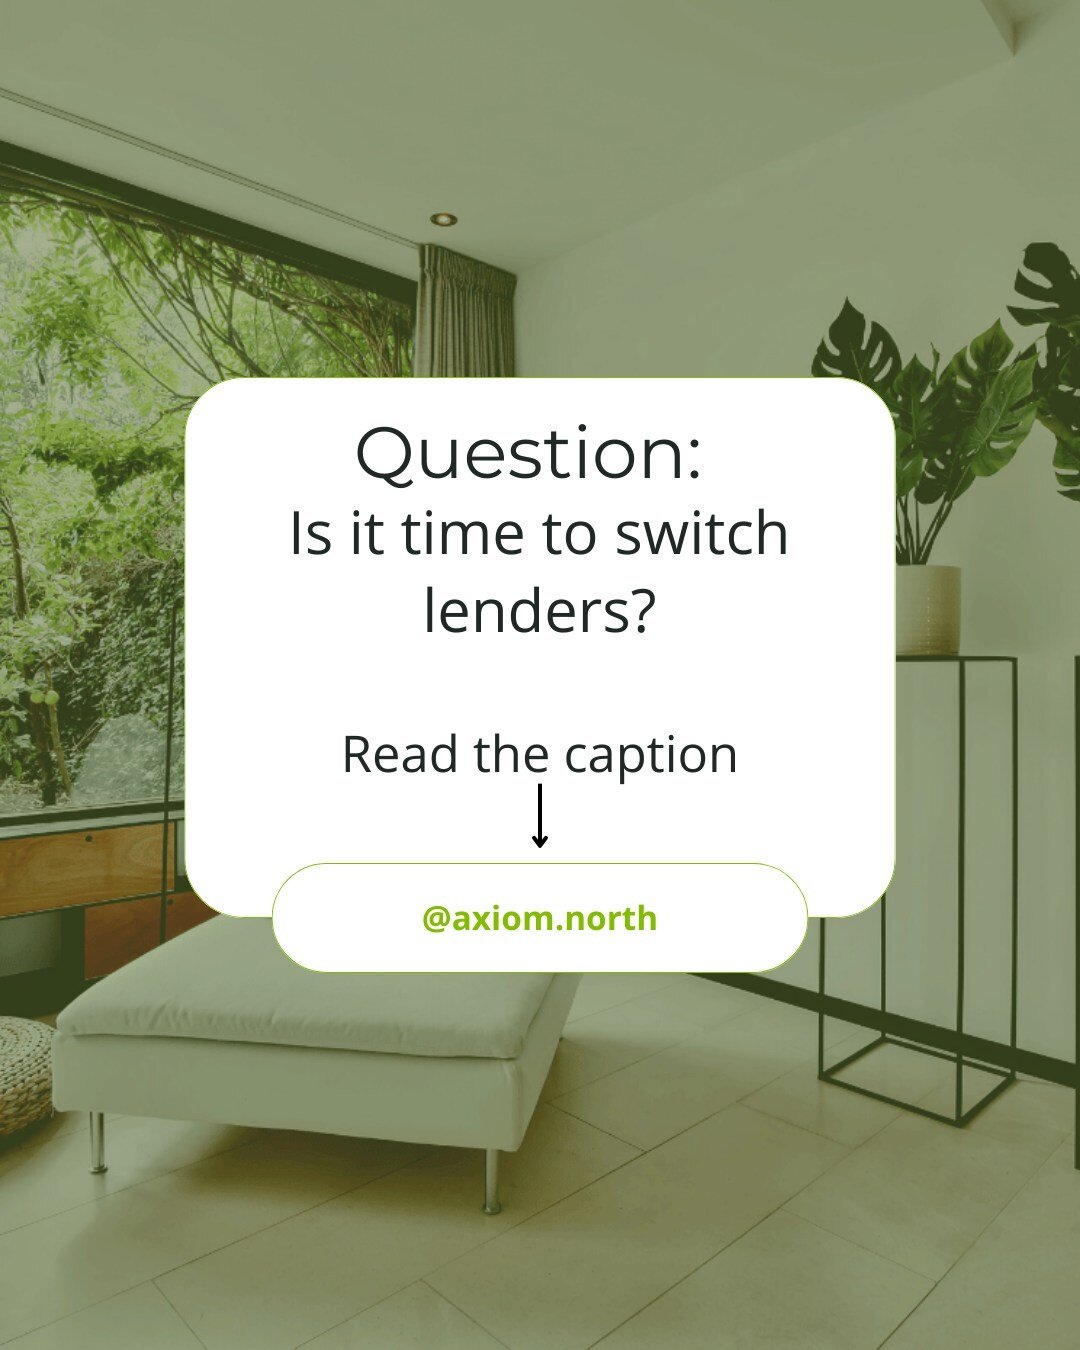 Why would you want to consider a change in lender when renewing or refinancing?

Your existing mortgage might not offer the most favourable terms. Alternatively, you might simply need a more flexible mortgage to suit your changing circumstances. Howe